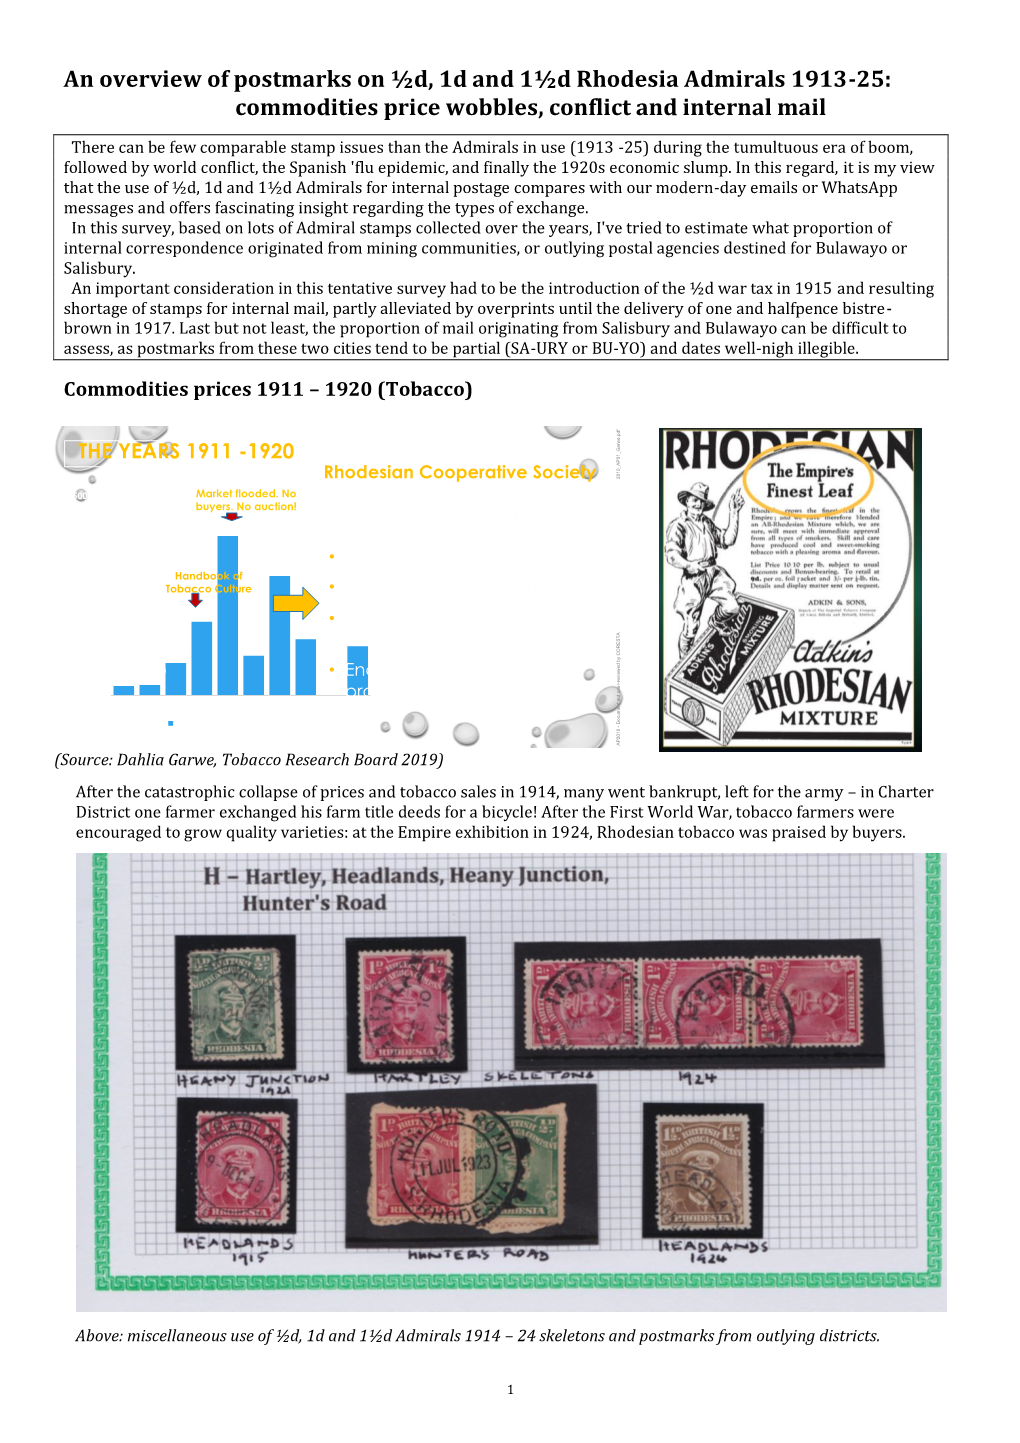 An Overview of Postmarks on ½D, 1D and 1½D Rhodesia Admirals 1913-25: Commodities Price Wobbles, Conflict and Internal Mail